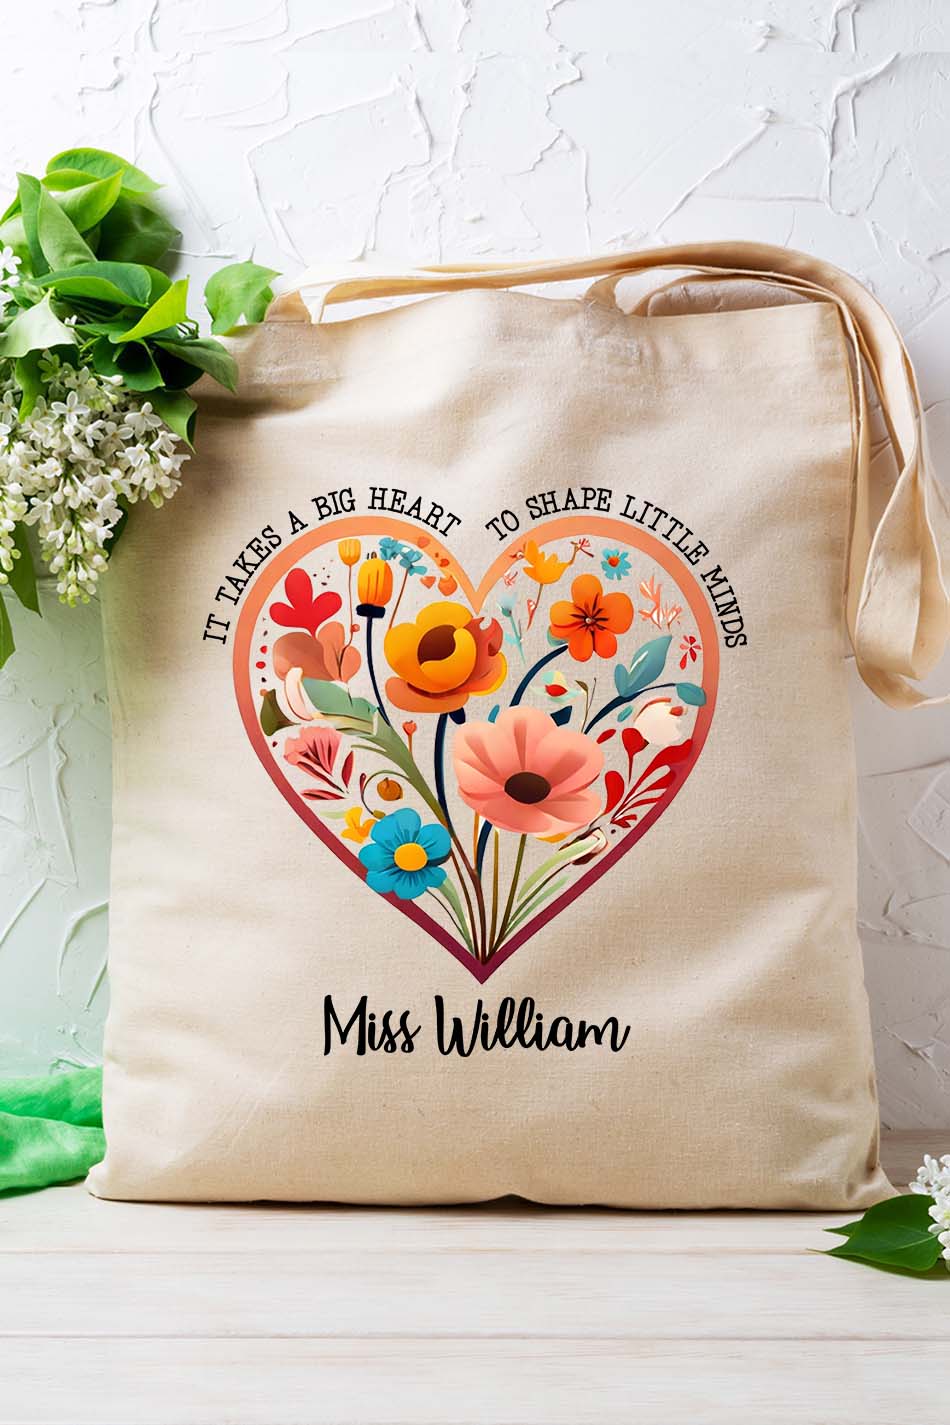 It Takes A Big Hearts To Help Shape Little Minds Personalized Tote Bag